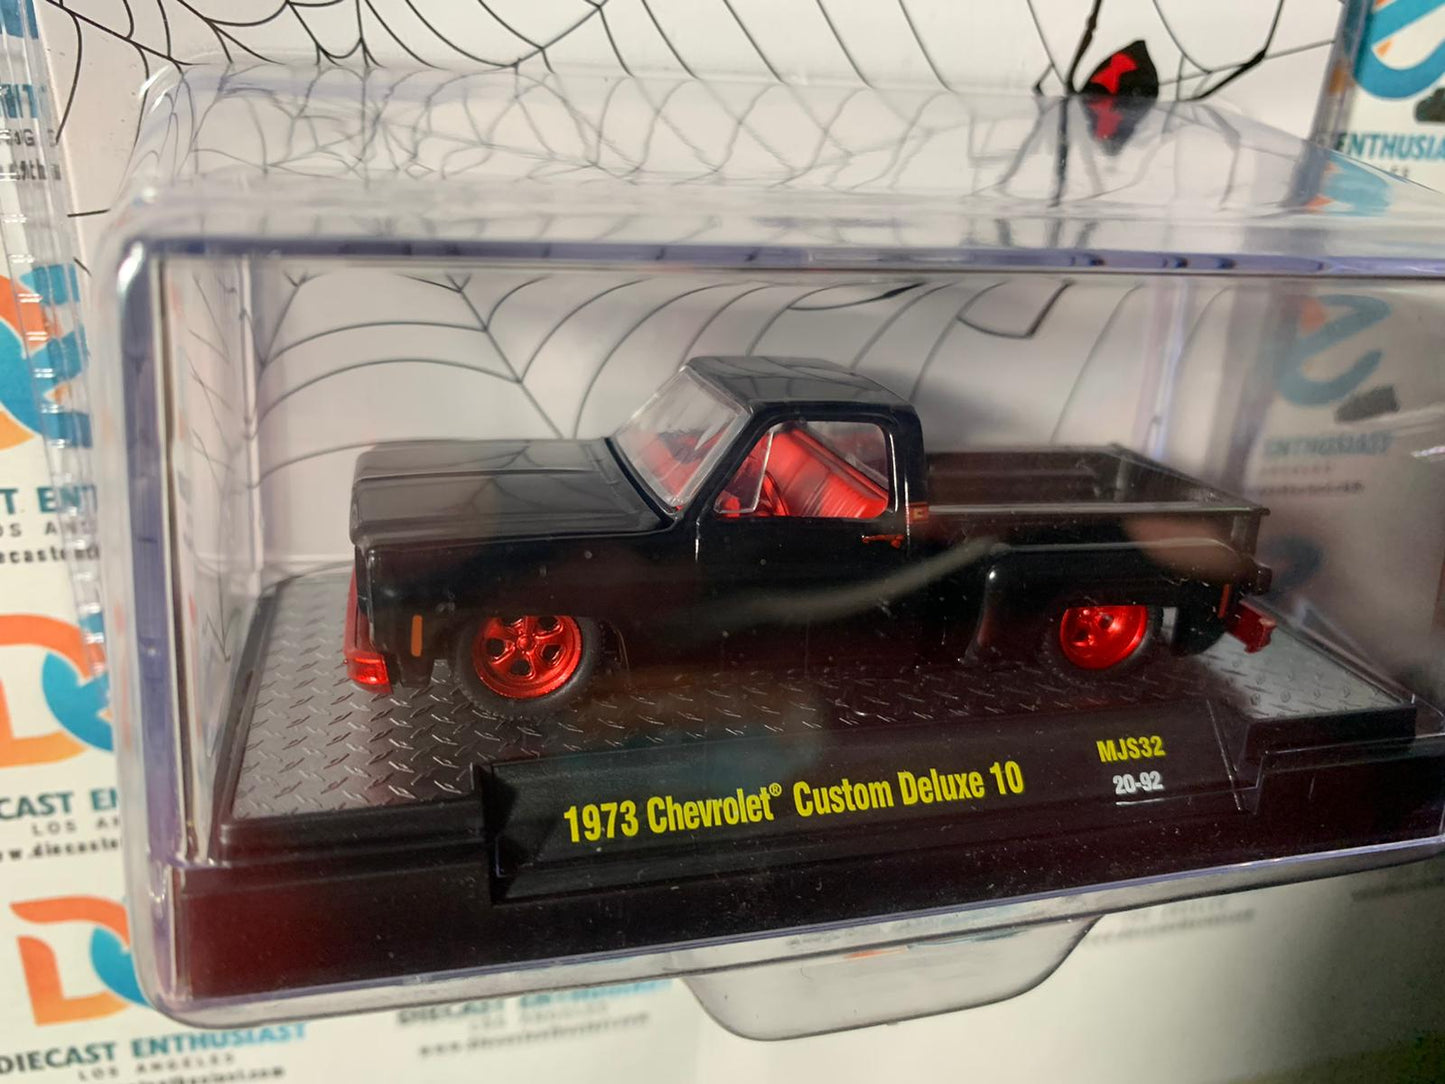 CHASE M2 Machines Mijo Exclusive 1973 Chevrolet Custome Deluxe 10 Black Widow 1/64